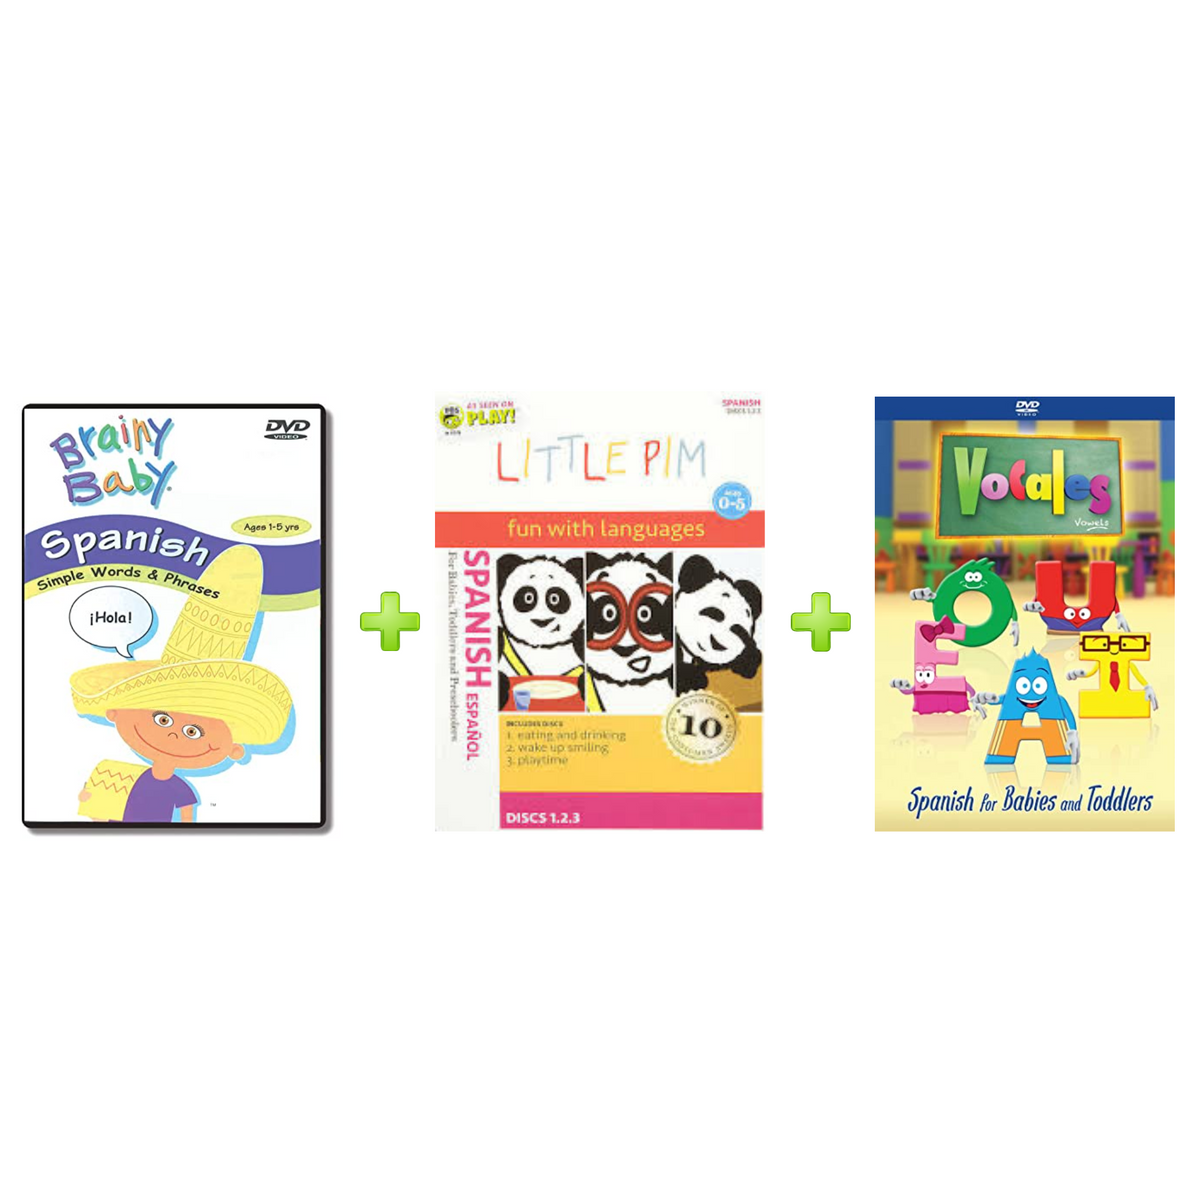 Spanish for Babies and Toddlers DVD Bundle